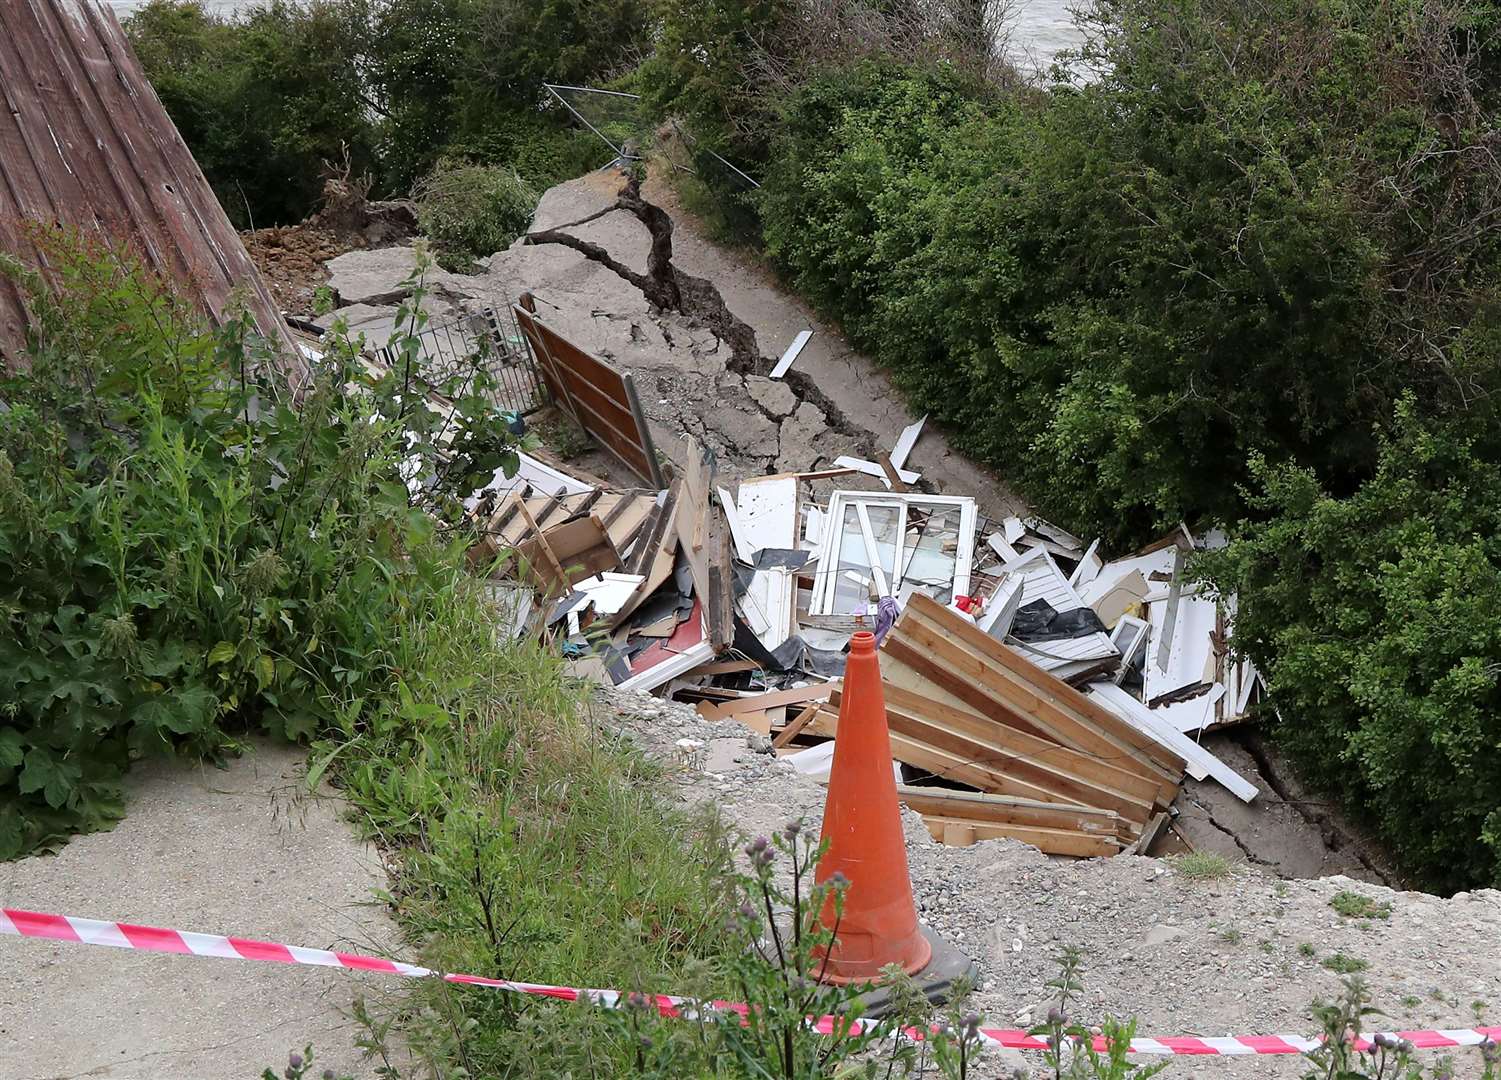 A landslip caused a bungalow to collapse towards the sea in an incident last year (Gareth Fuller/PA)